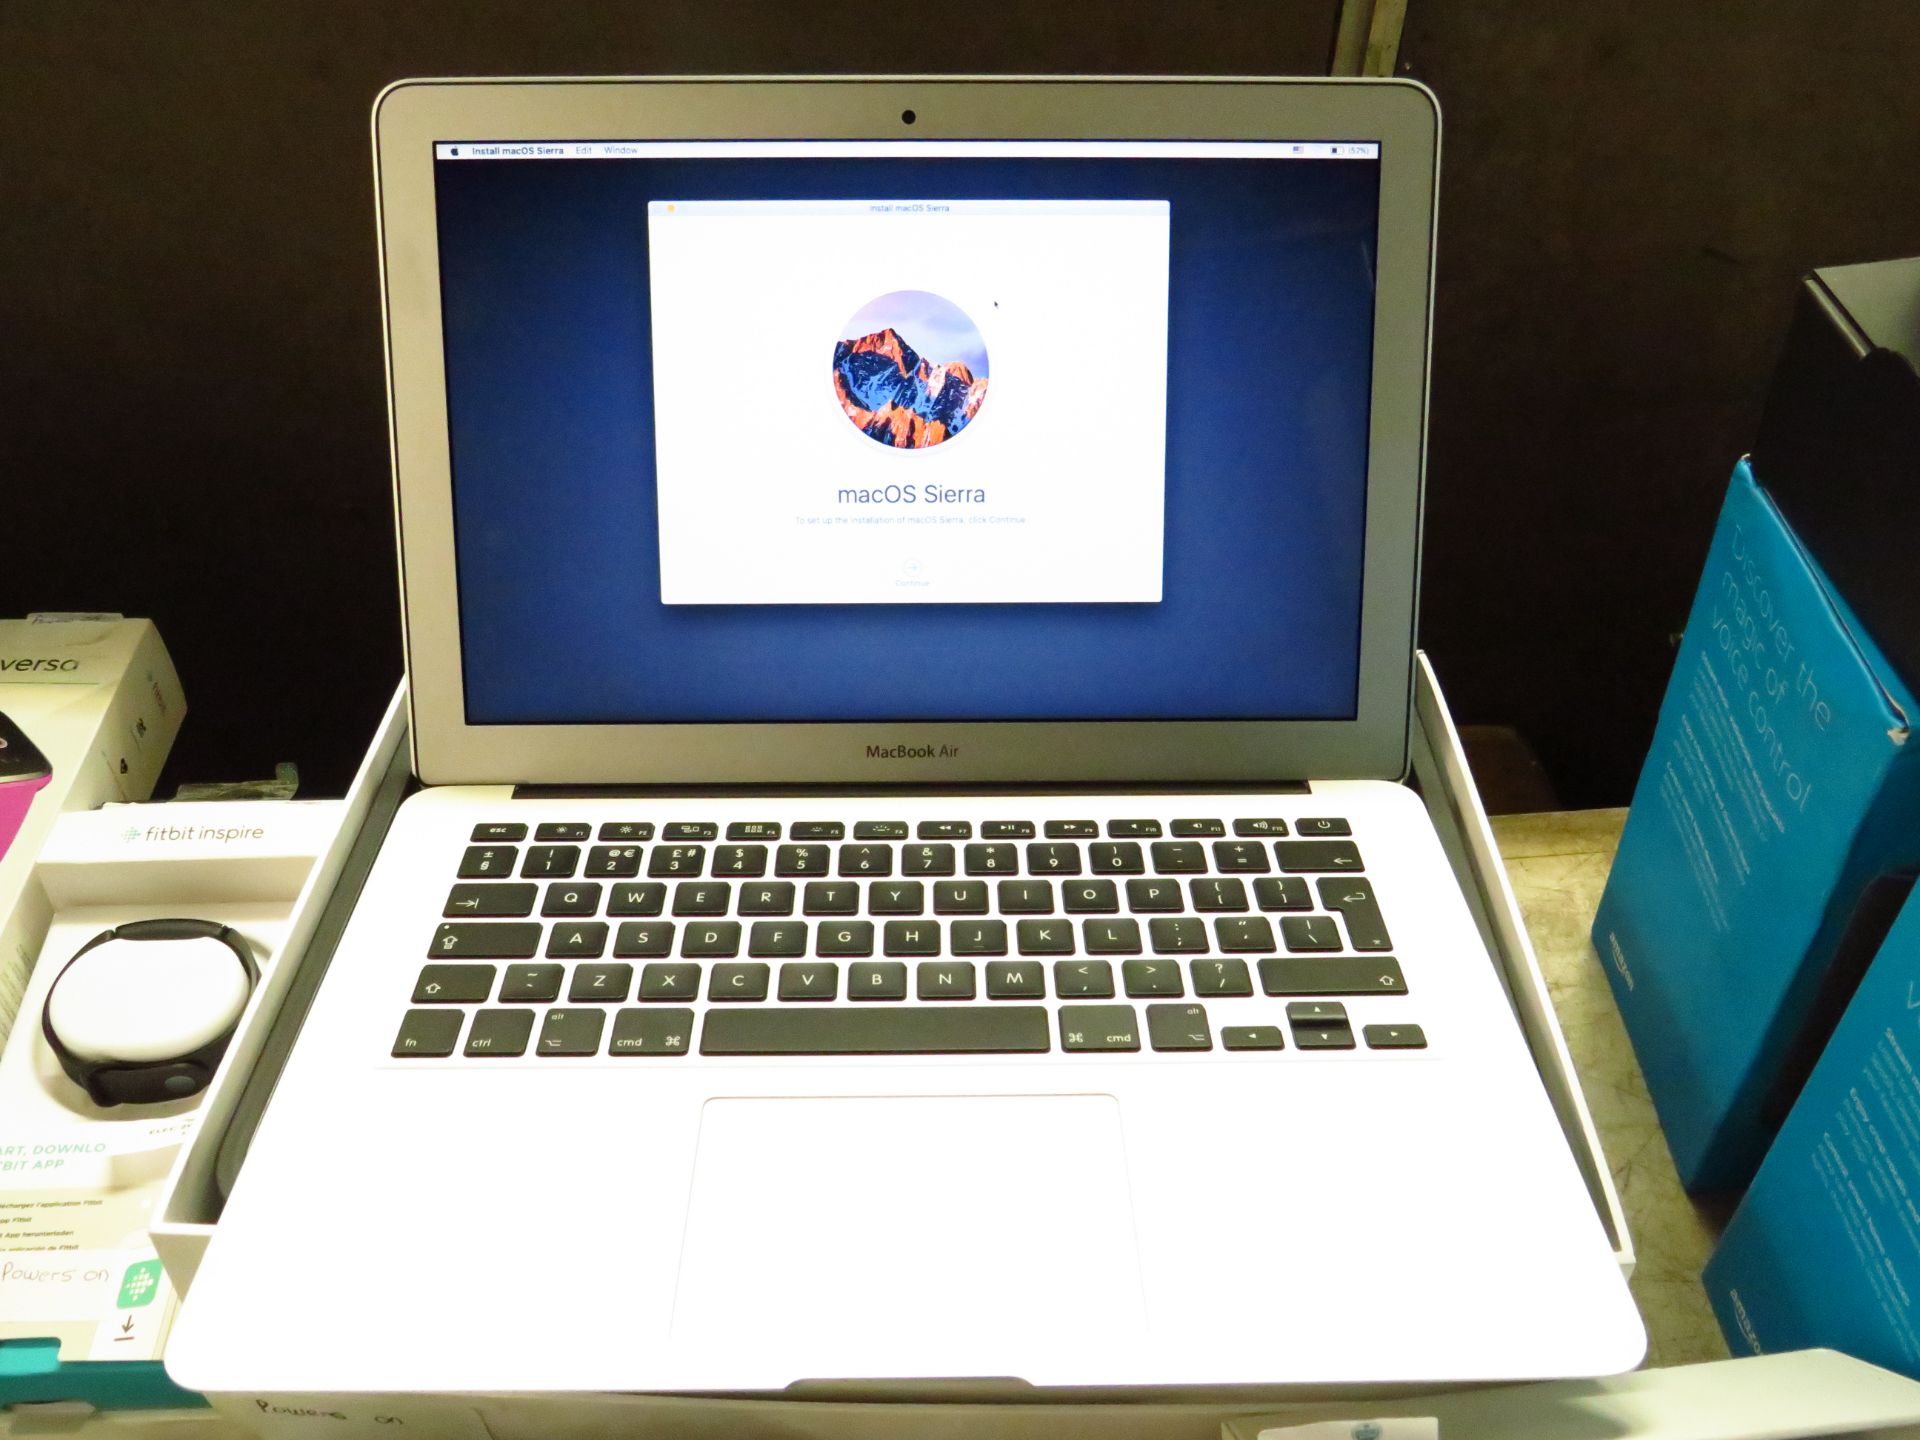 Apple Mac book Air 13" model A-1466, Serial No C1MT91STH3QF, comes with original box and charger,